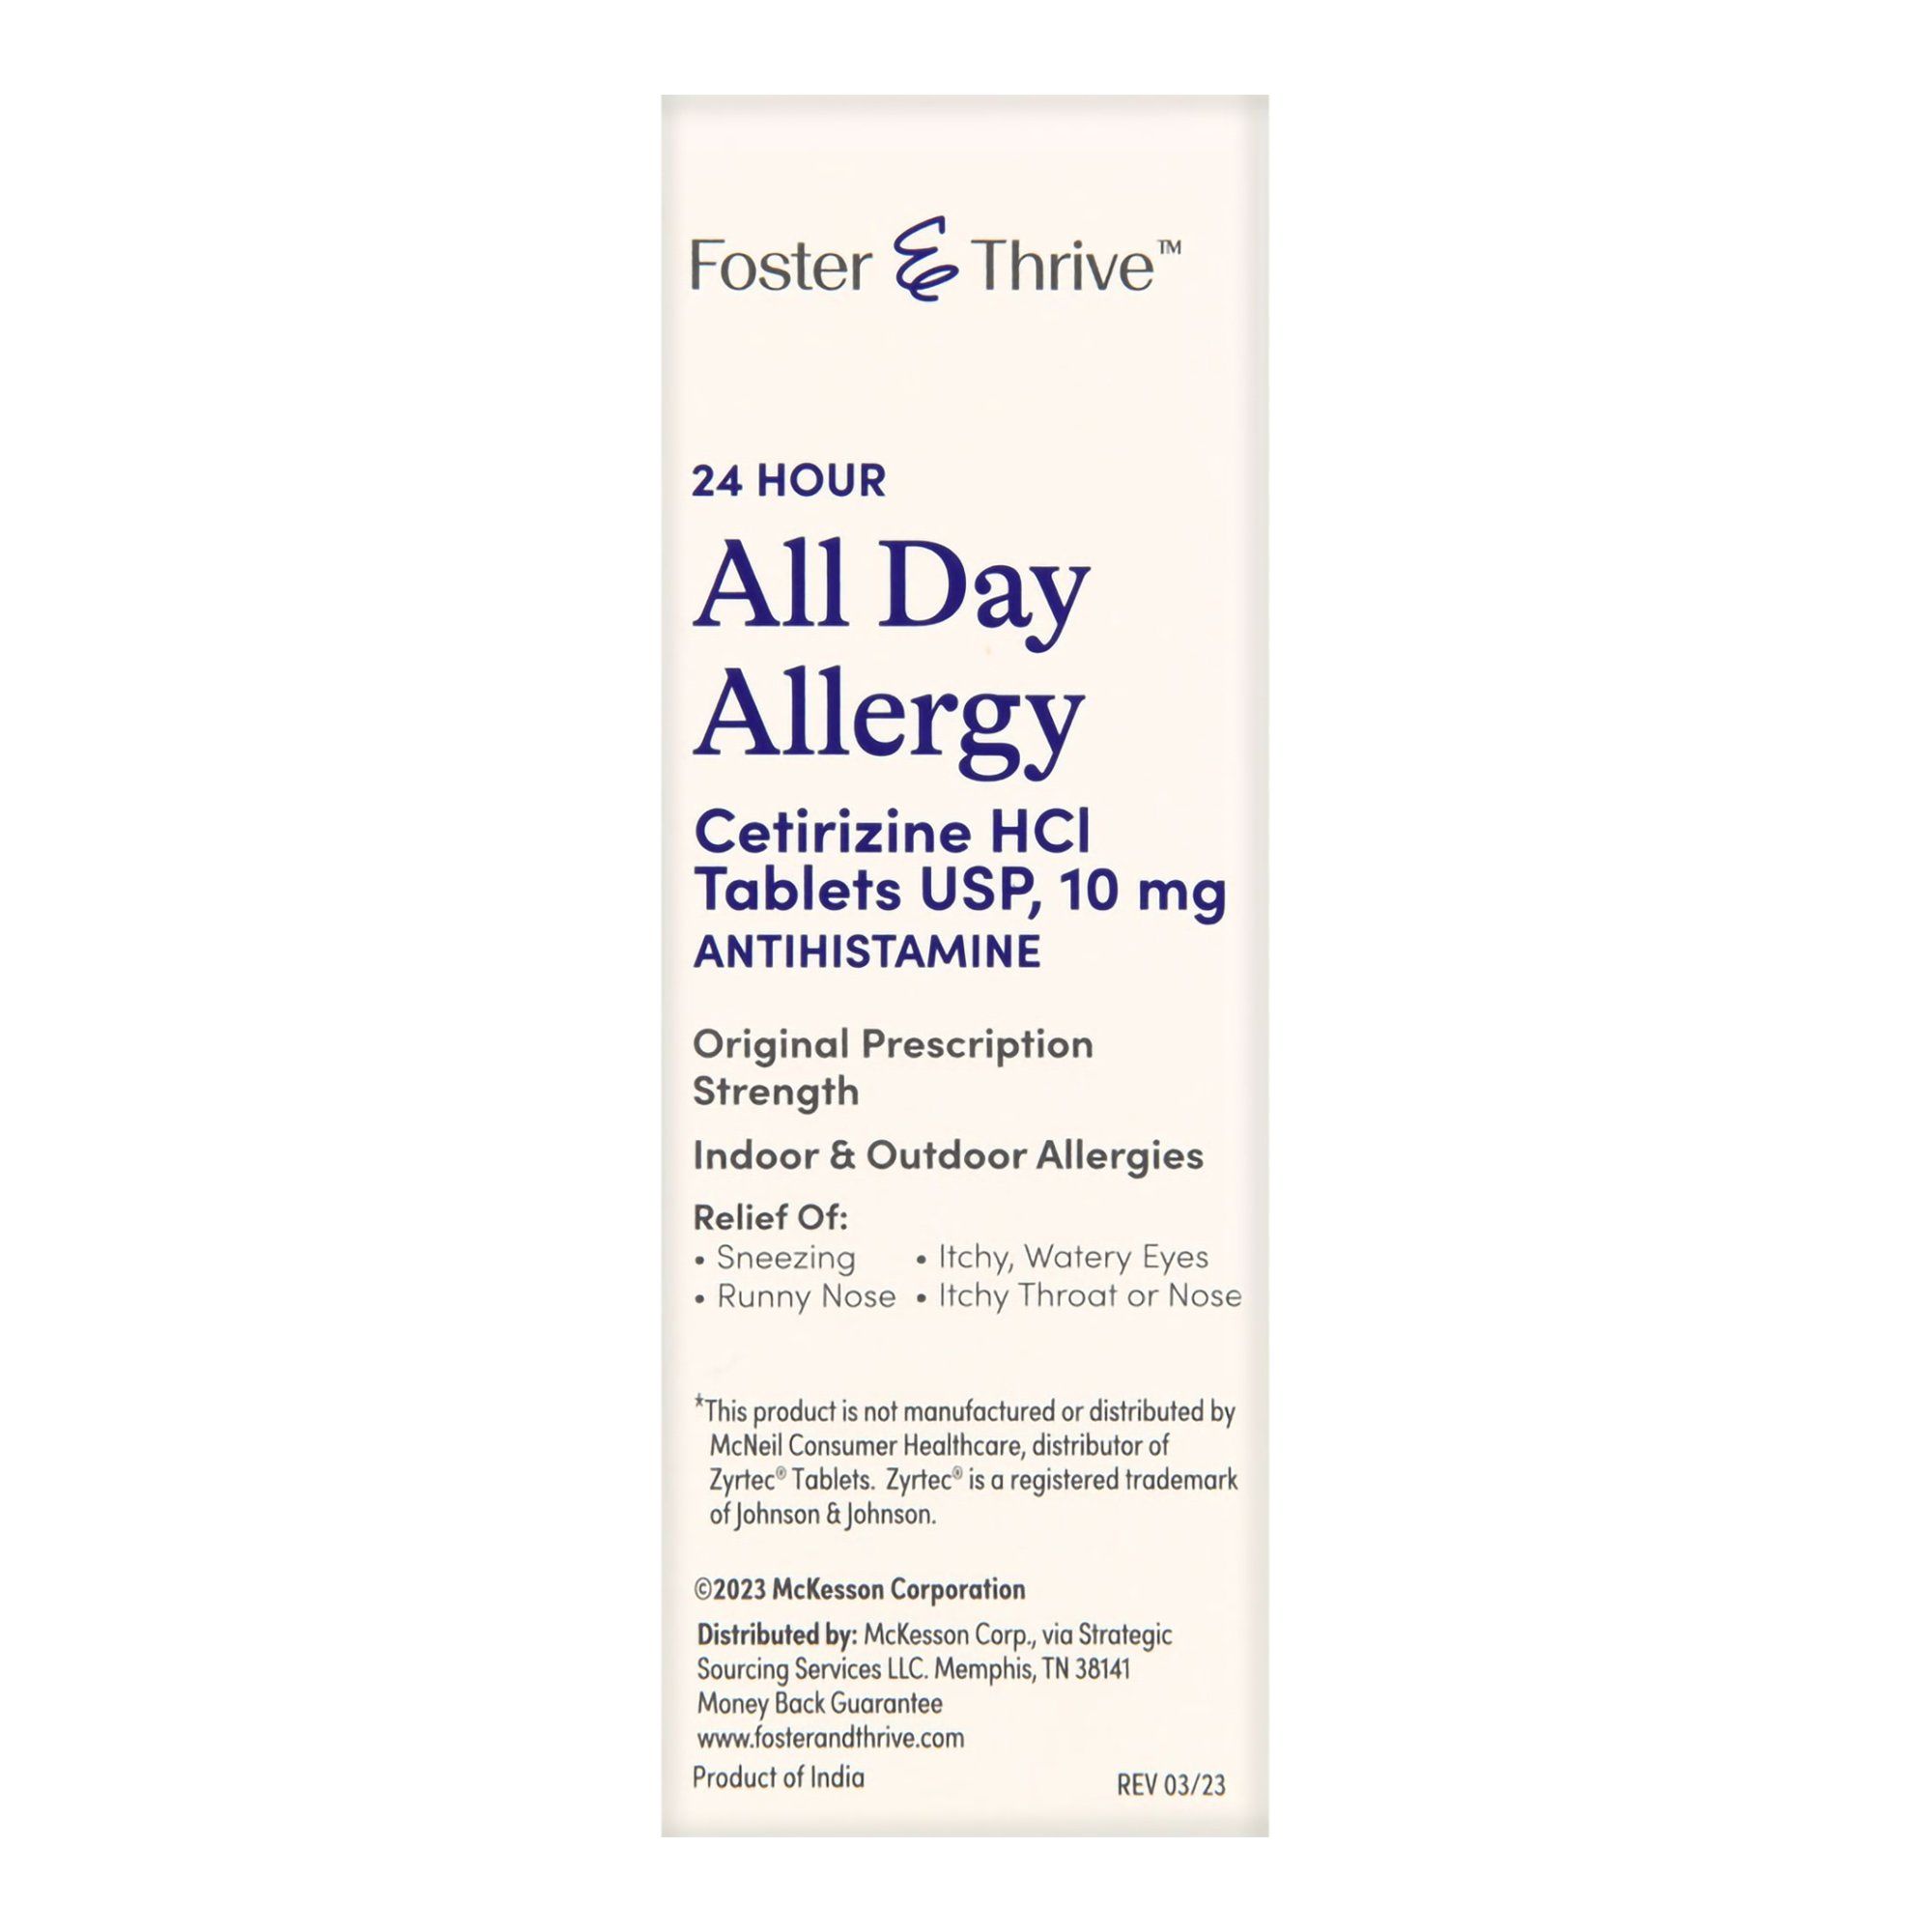 Foster & Thrive All Day Allergy Relief Cetirizine Tablets,10 mg - 30 ct